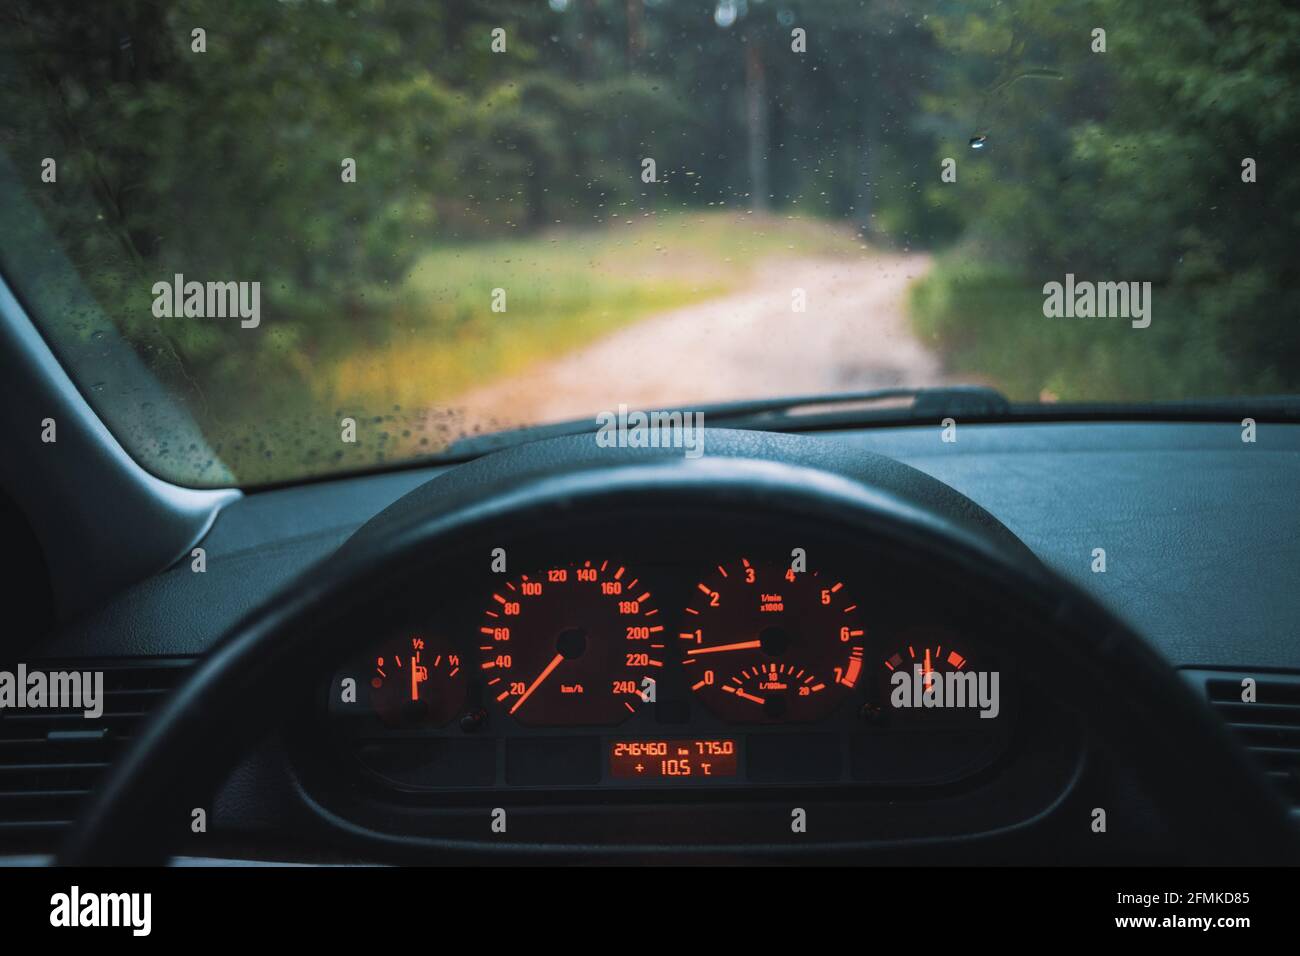 Instrument Cluster High Resolution Stock Photography and Images - Alamy